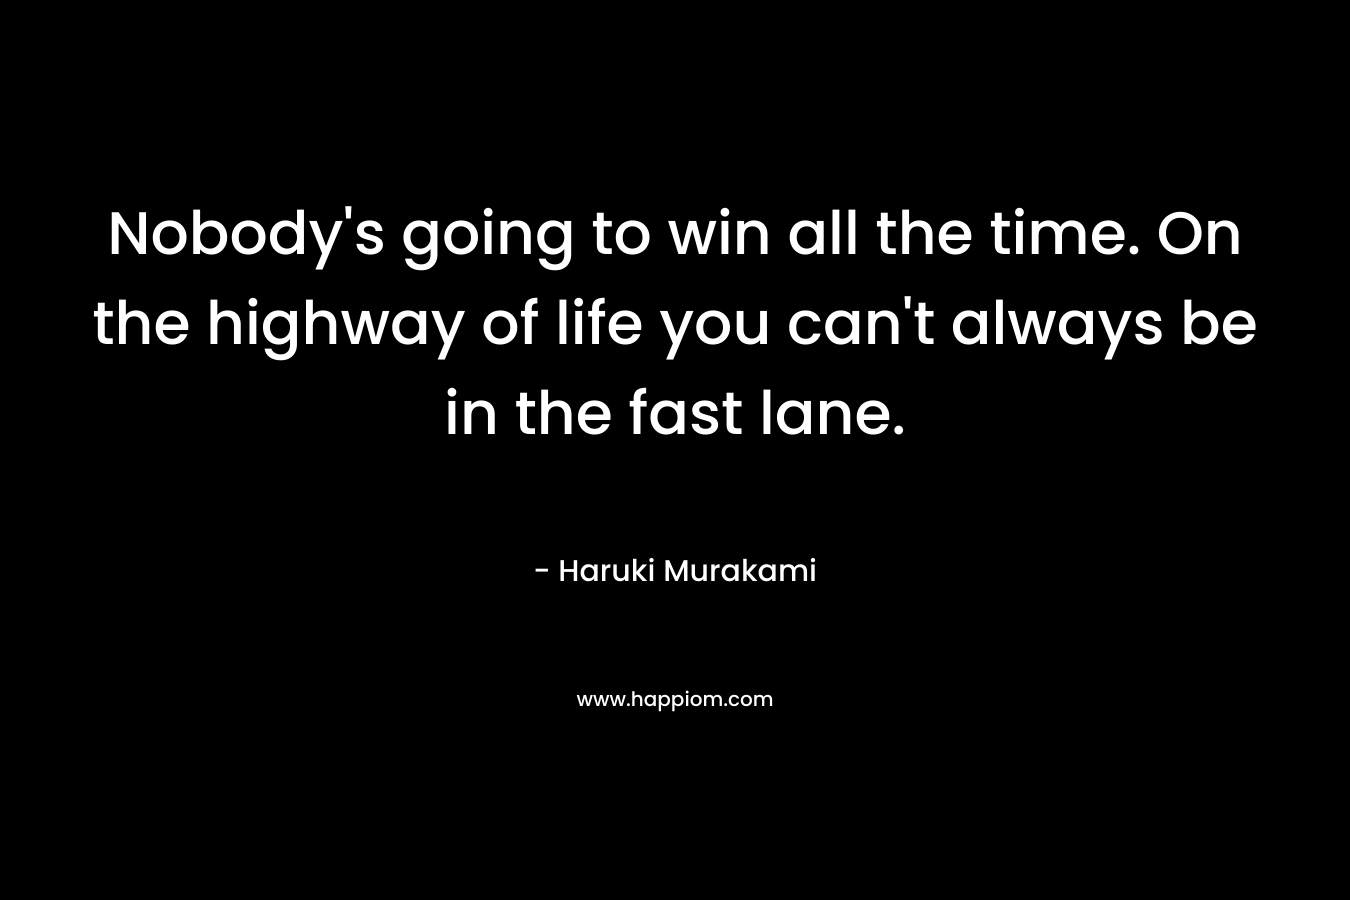 Nobody's going to win all the time. On the highway of life you can't always be in the fast lane.